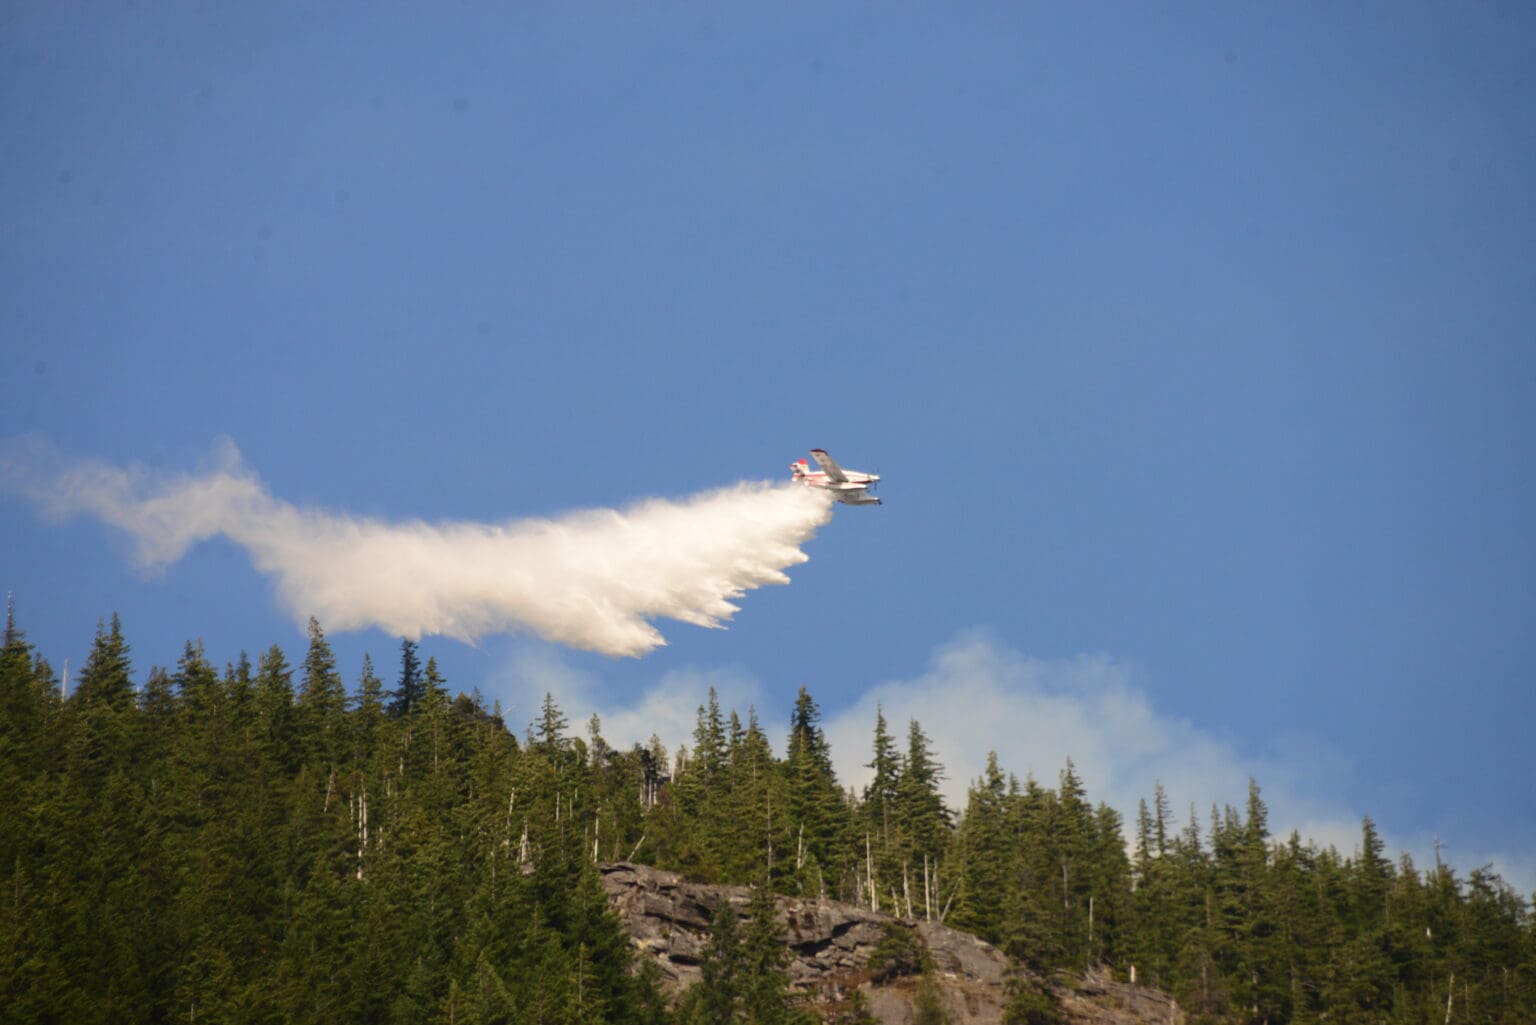 Several planes and helicopters were deployed to fight the Sourdough wildfire near Diablo Lake Saturday